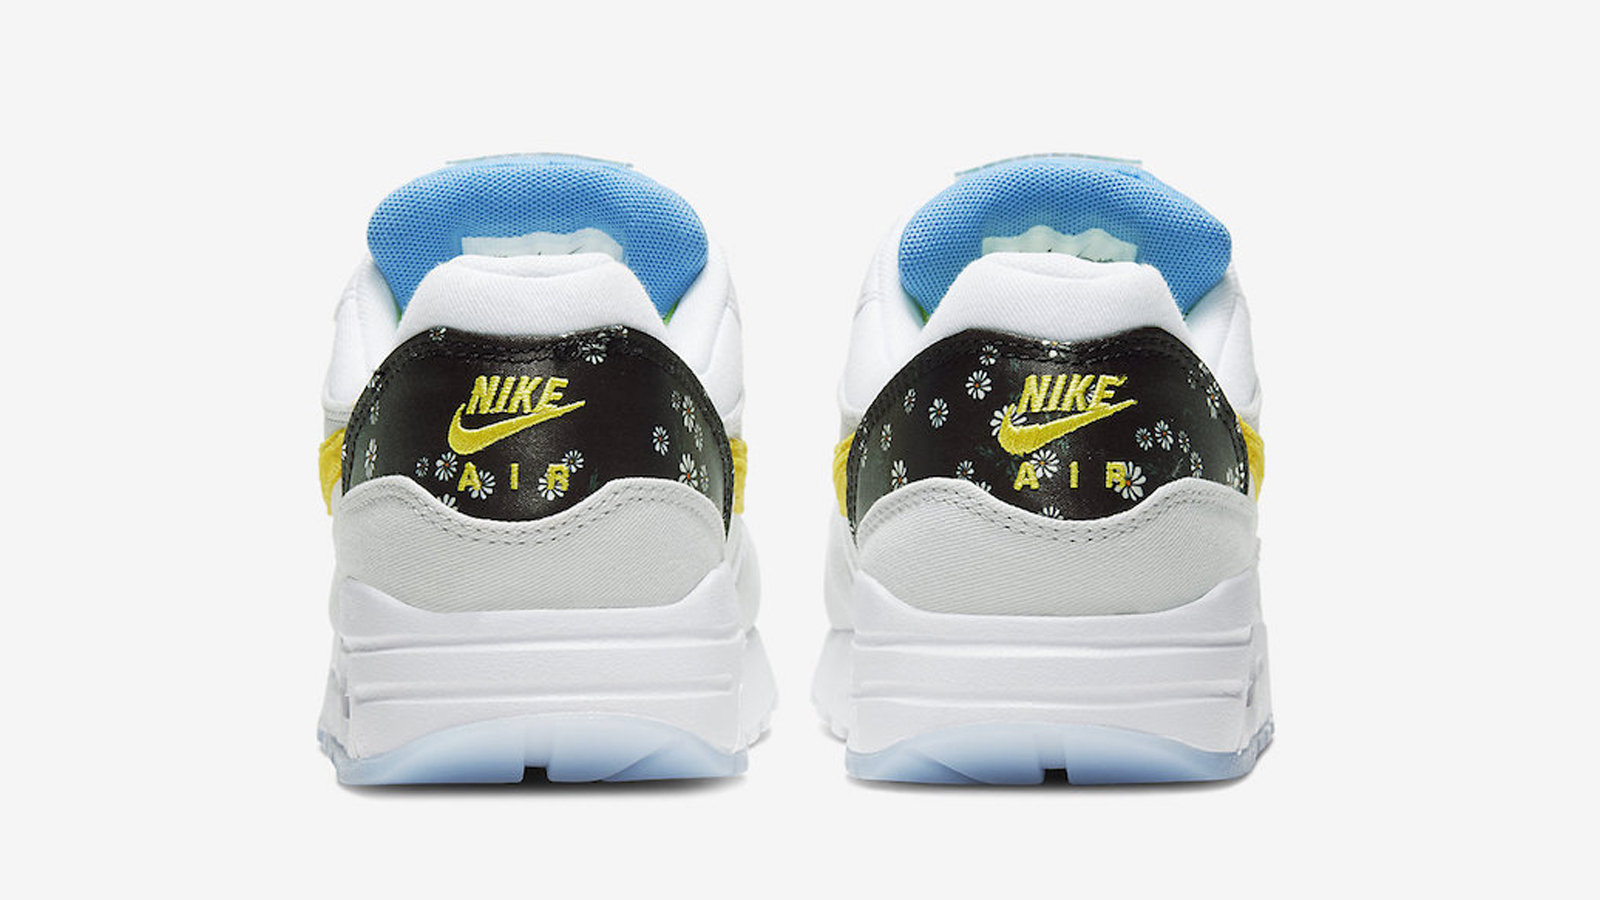 <strong>Step Into Spring With The Daisy-Inspired Nike Air Max 90</strong>